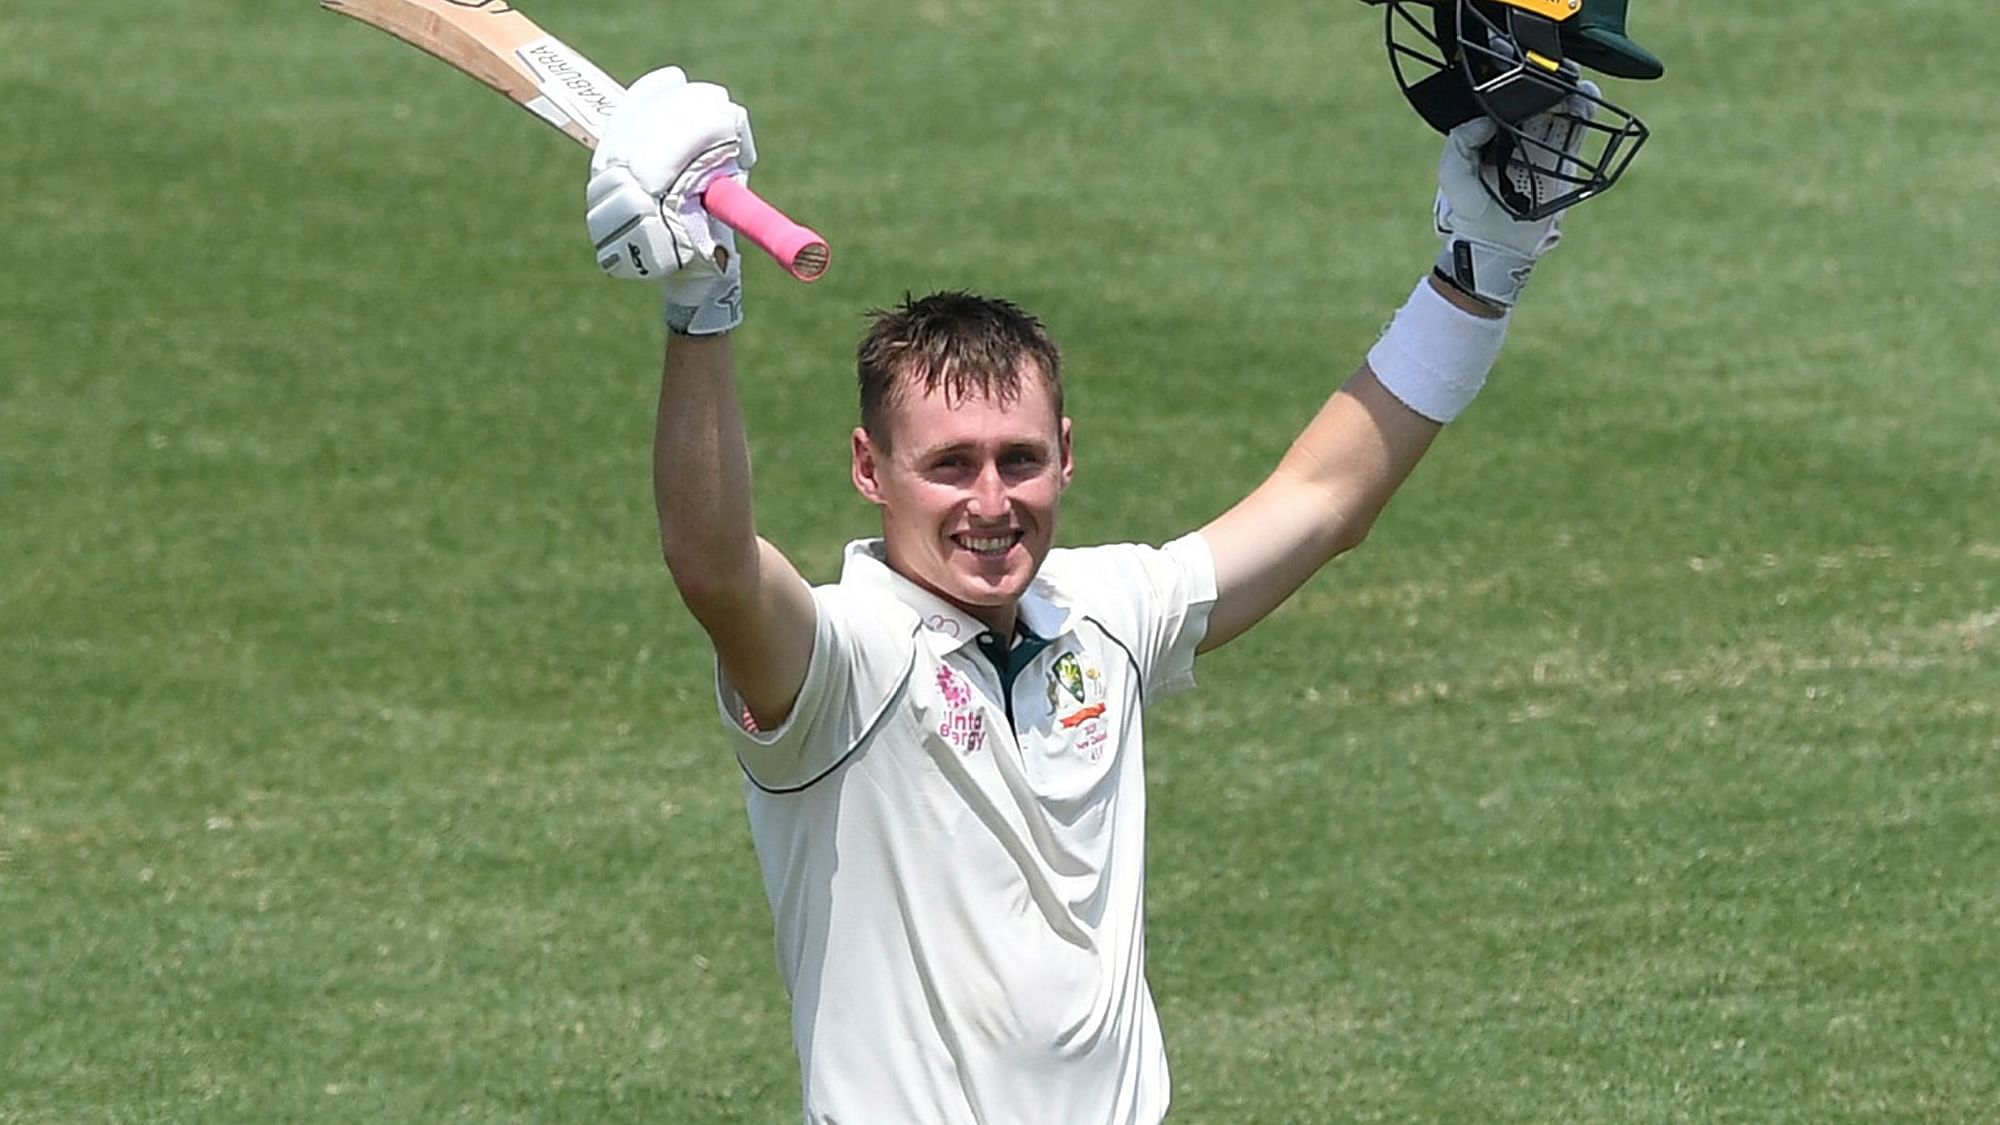 Australia’s Marnus Labuschagne celebrates his double century 200 not out, on day two of the third cricket test match between Australia and New Zealand at the Sydney Cricket Ground, Sydney, Australia. Saturday Jan. 4 2020